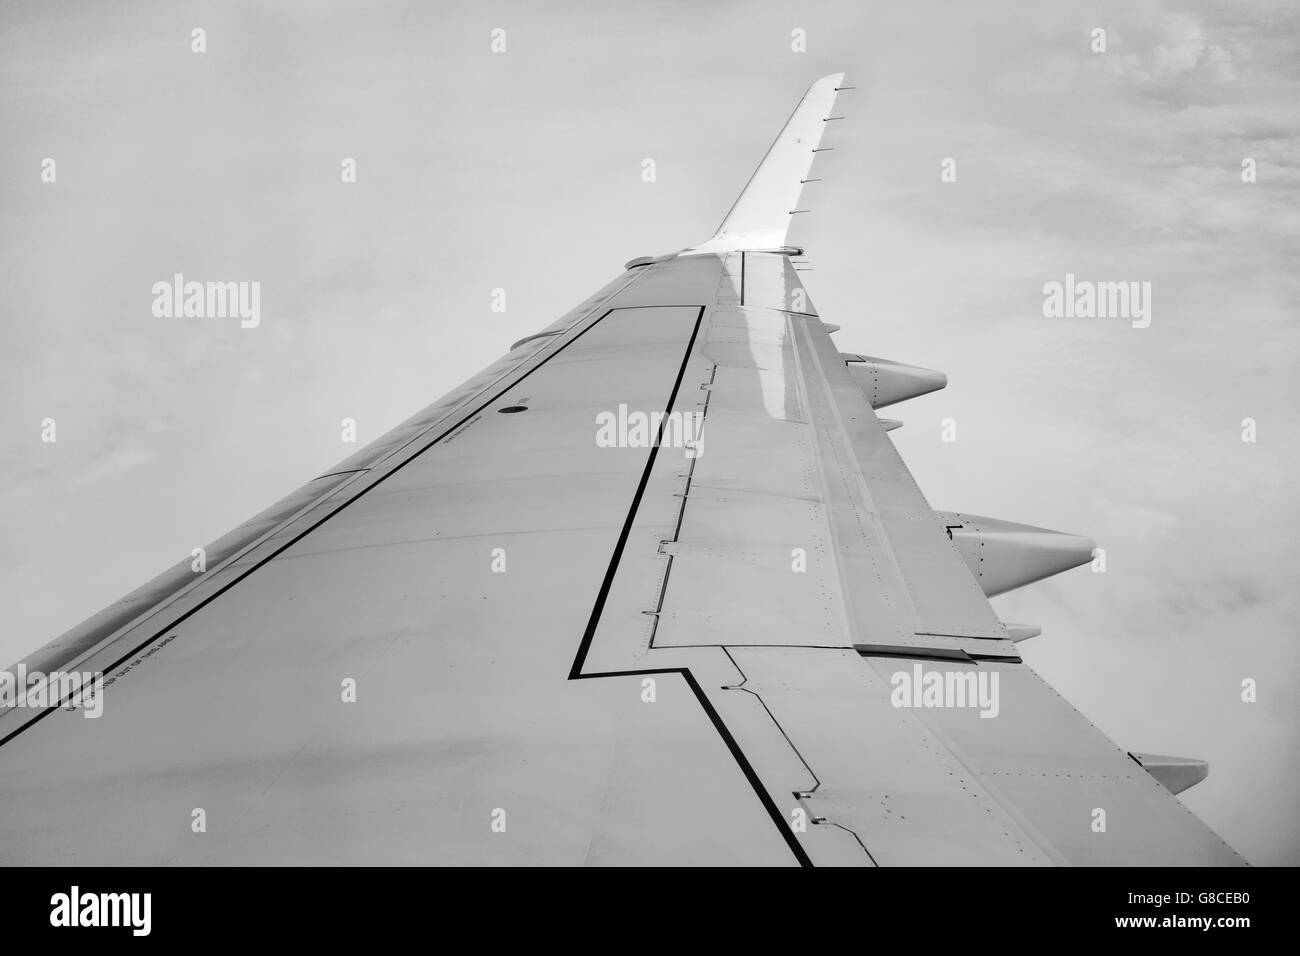 Monochrome image of an aircraft wing above grey clouds Stock Photo